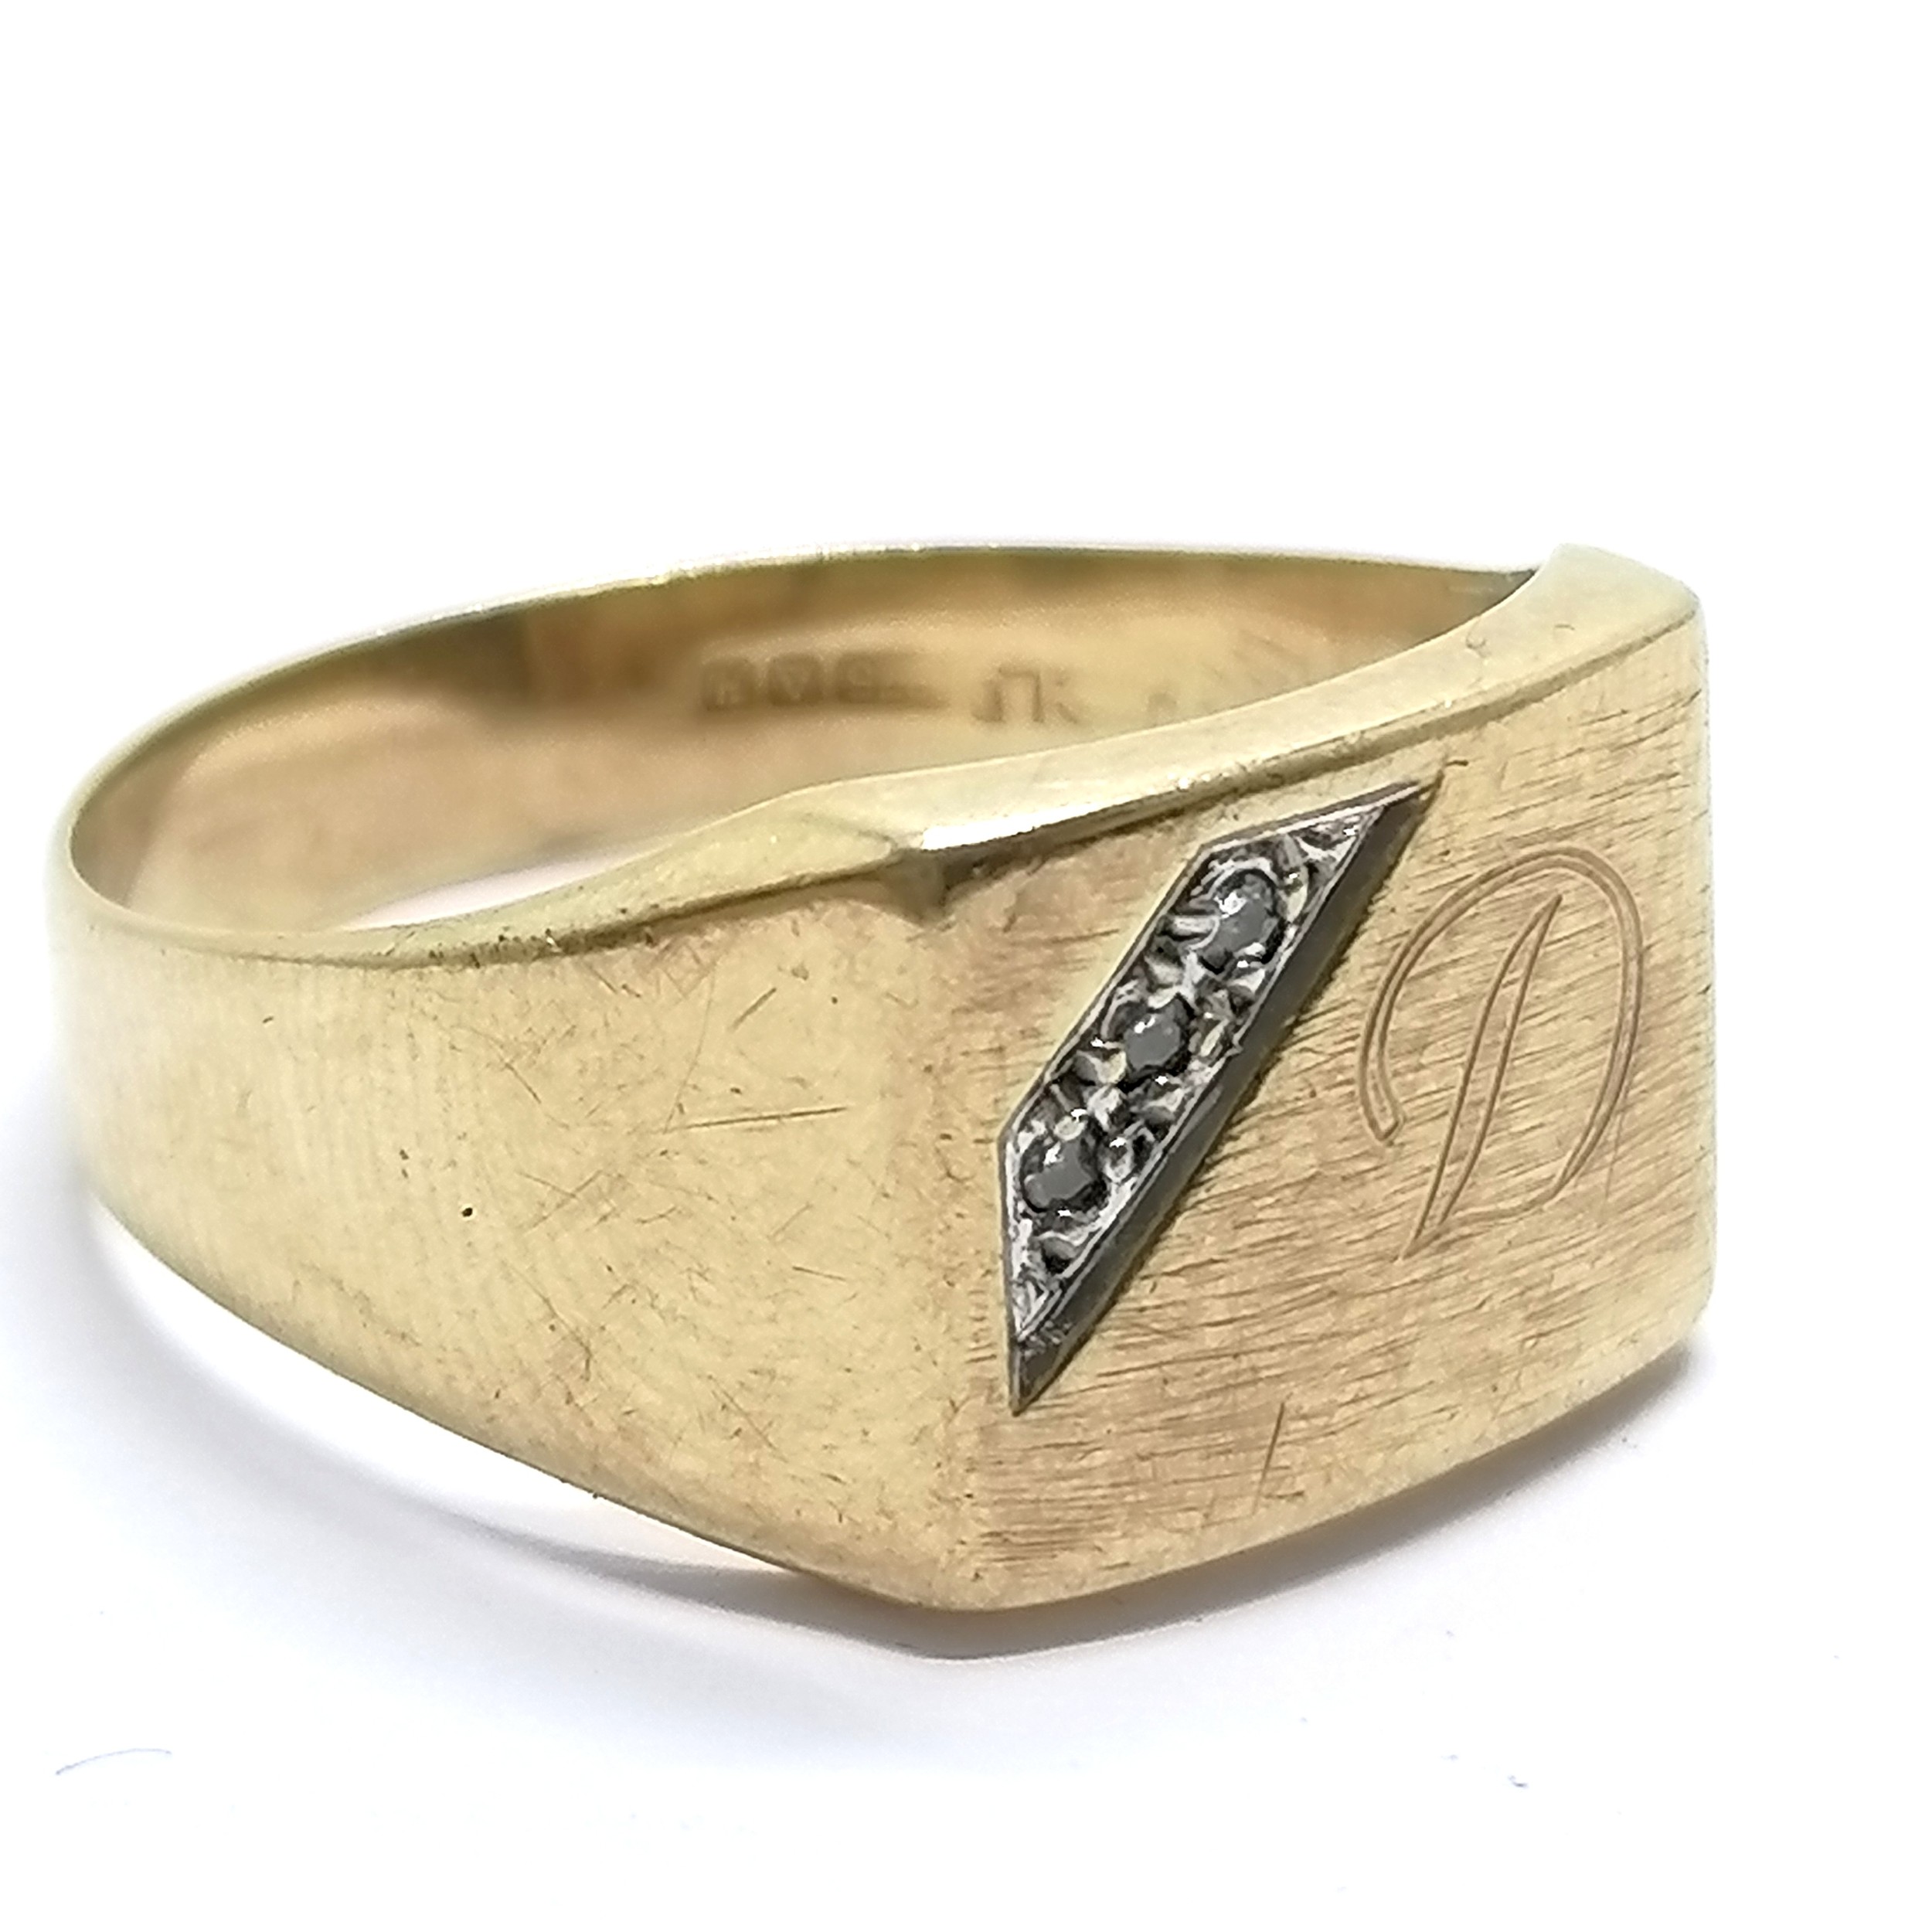 9ct hallmarked gold signet ring set with white stone & D monogram - size V & 3.2g total weight - Image 2 of 2